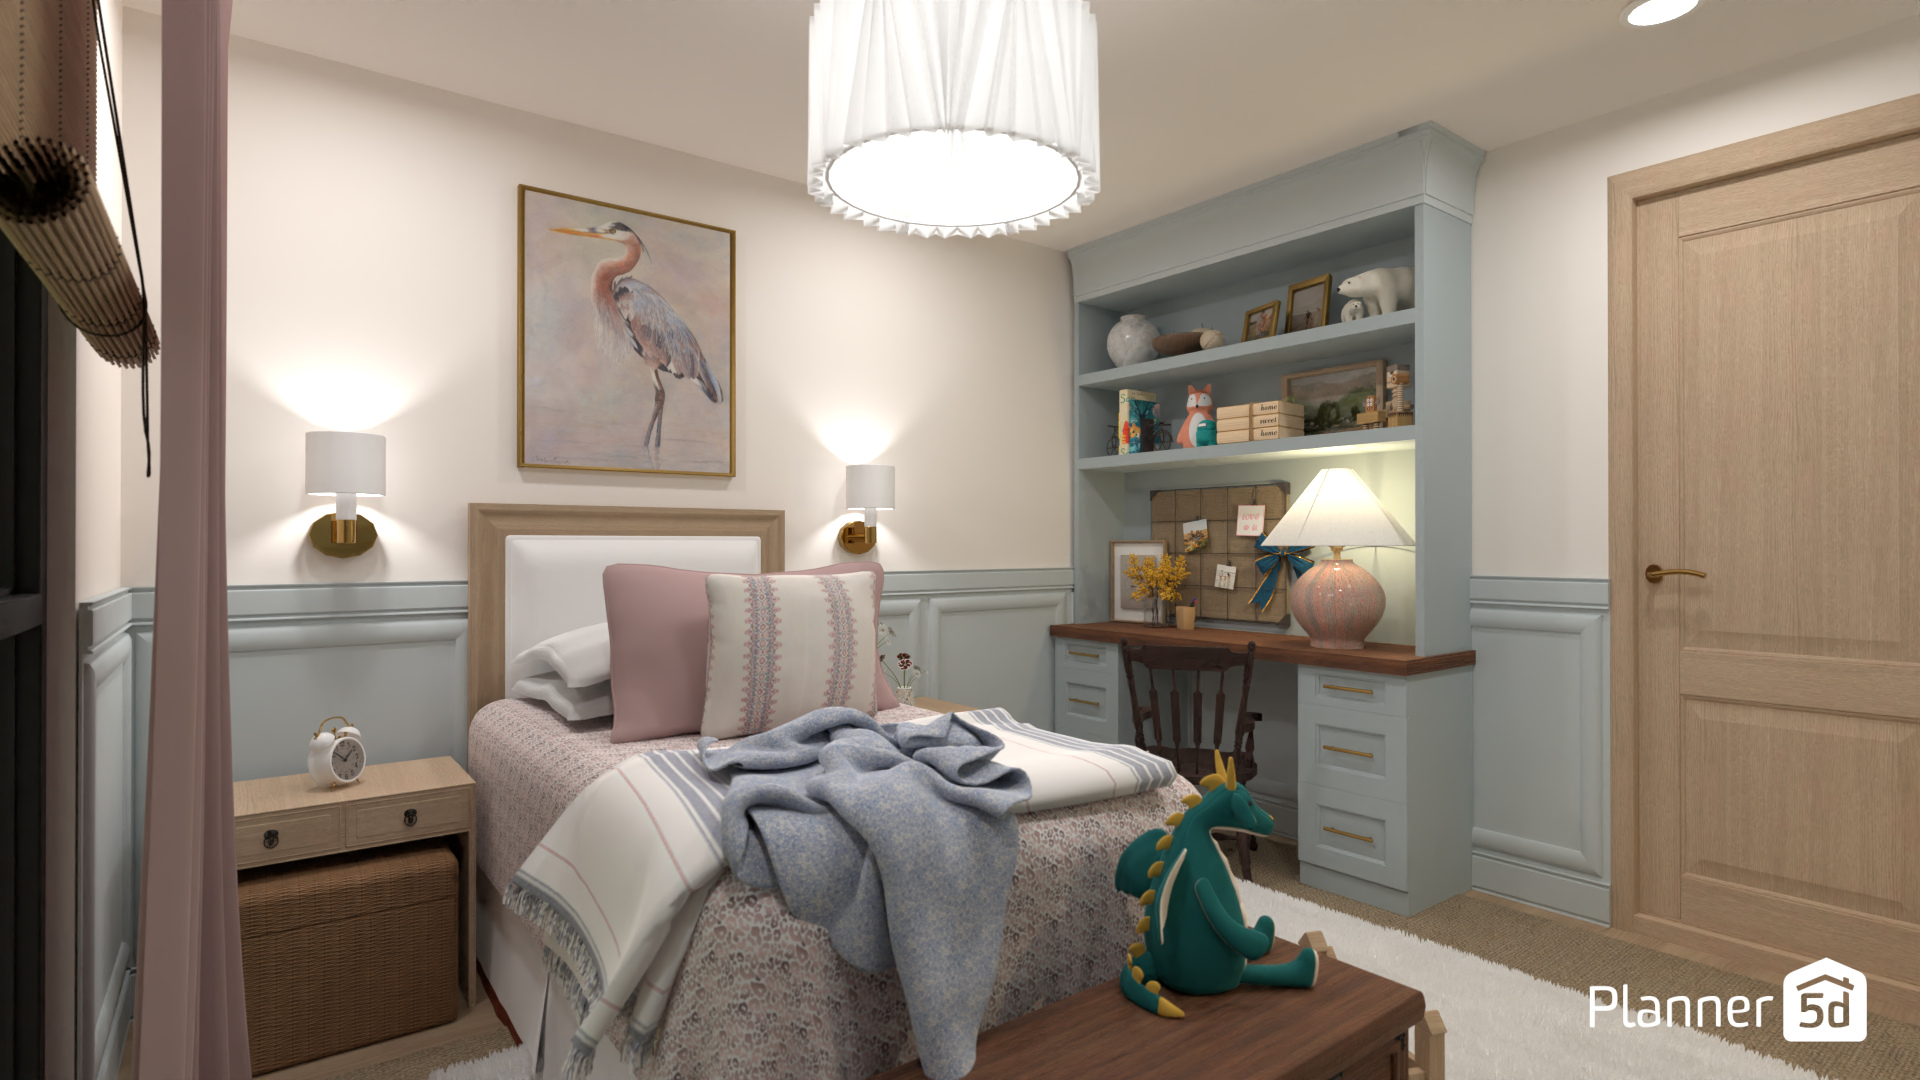 Kid's room in Behr paint colors 16349699 by Darina Doncheva image